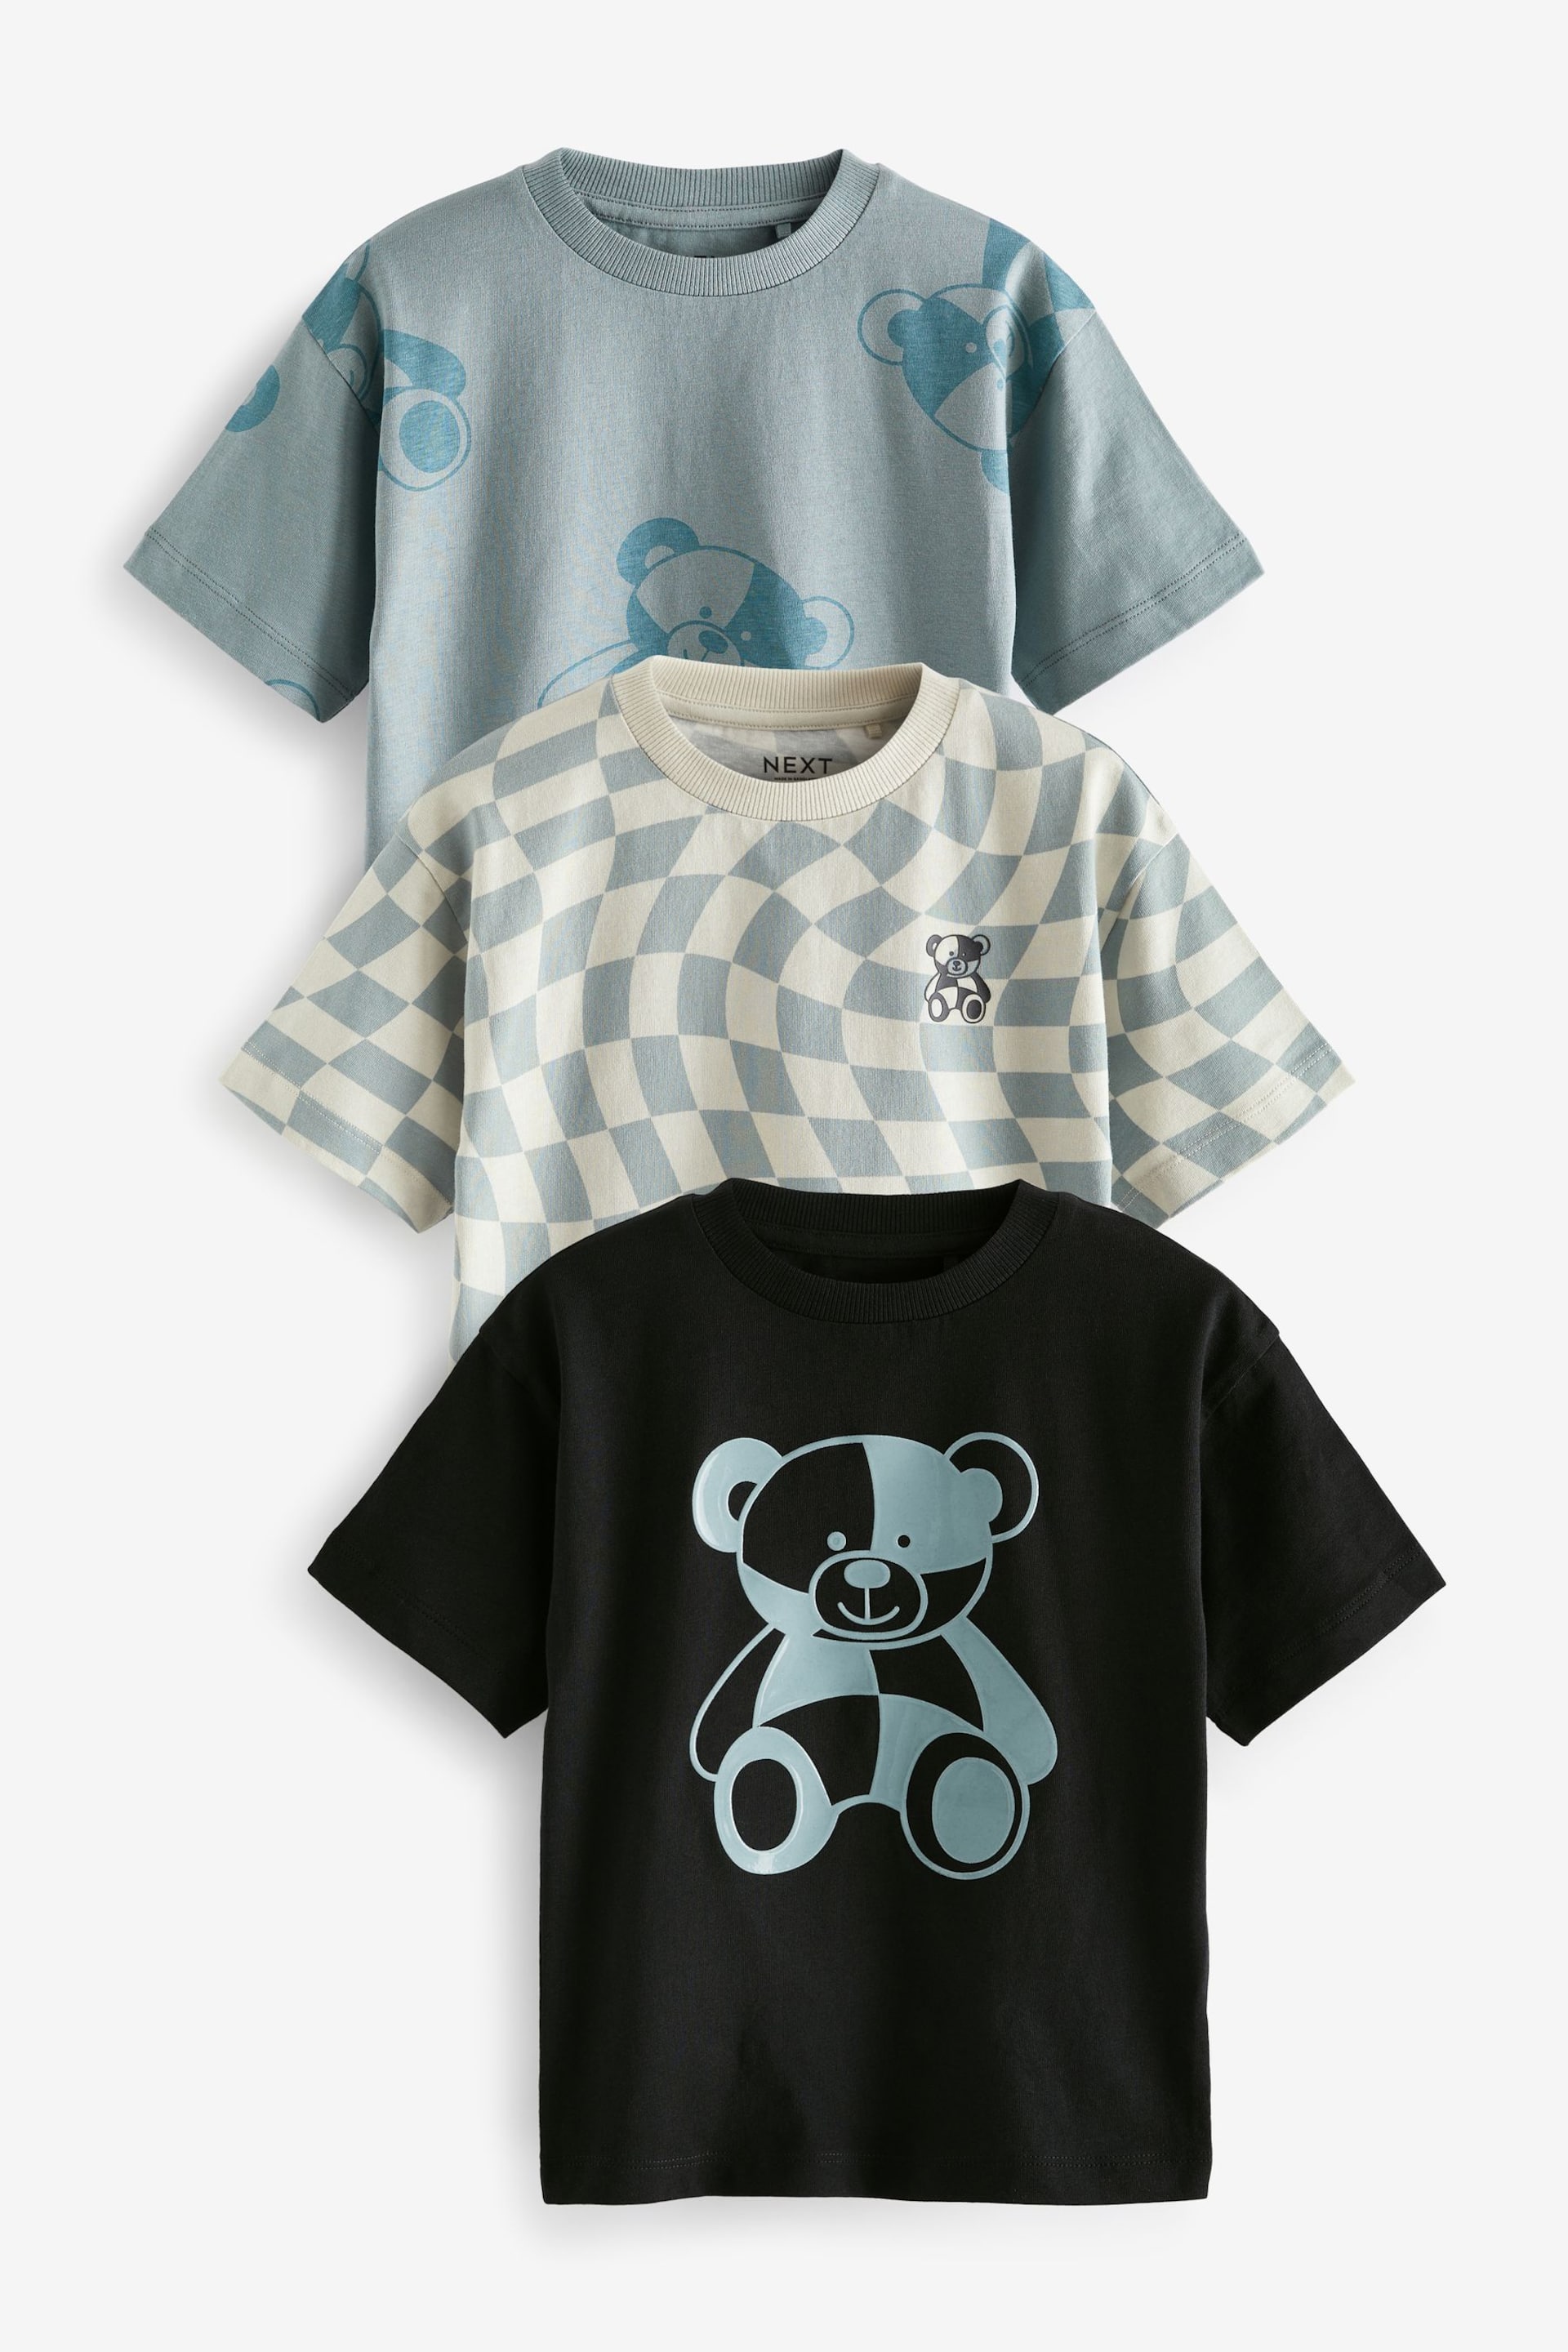 Blue/Black Short Sleeve Character T-Shirts 3 Pack (3mths-7yrs) - Image 1 of 7